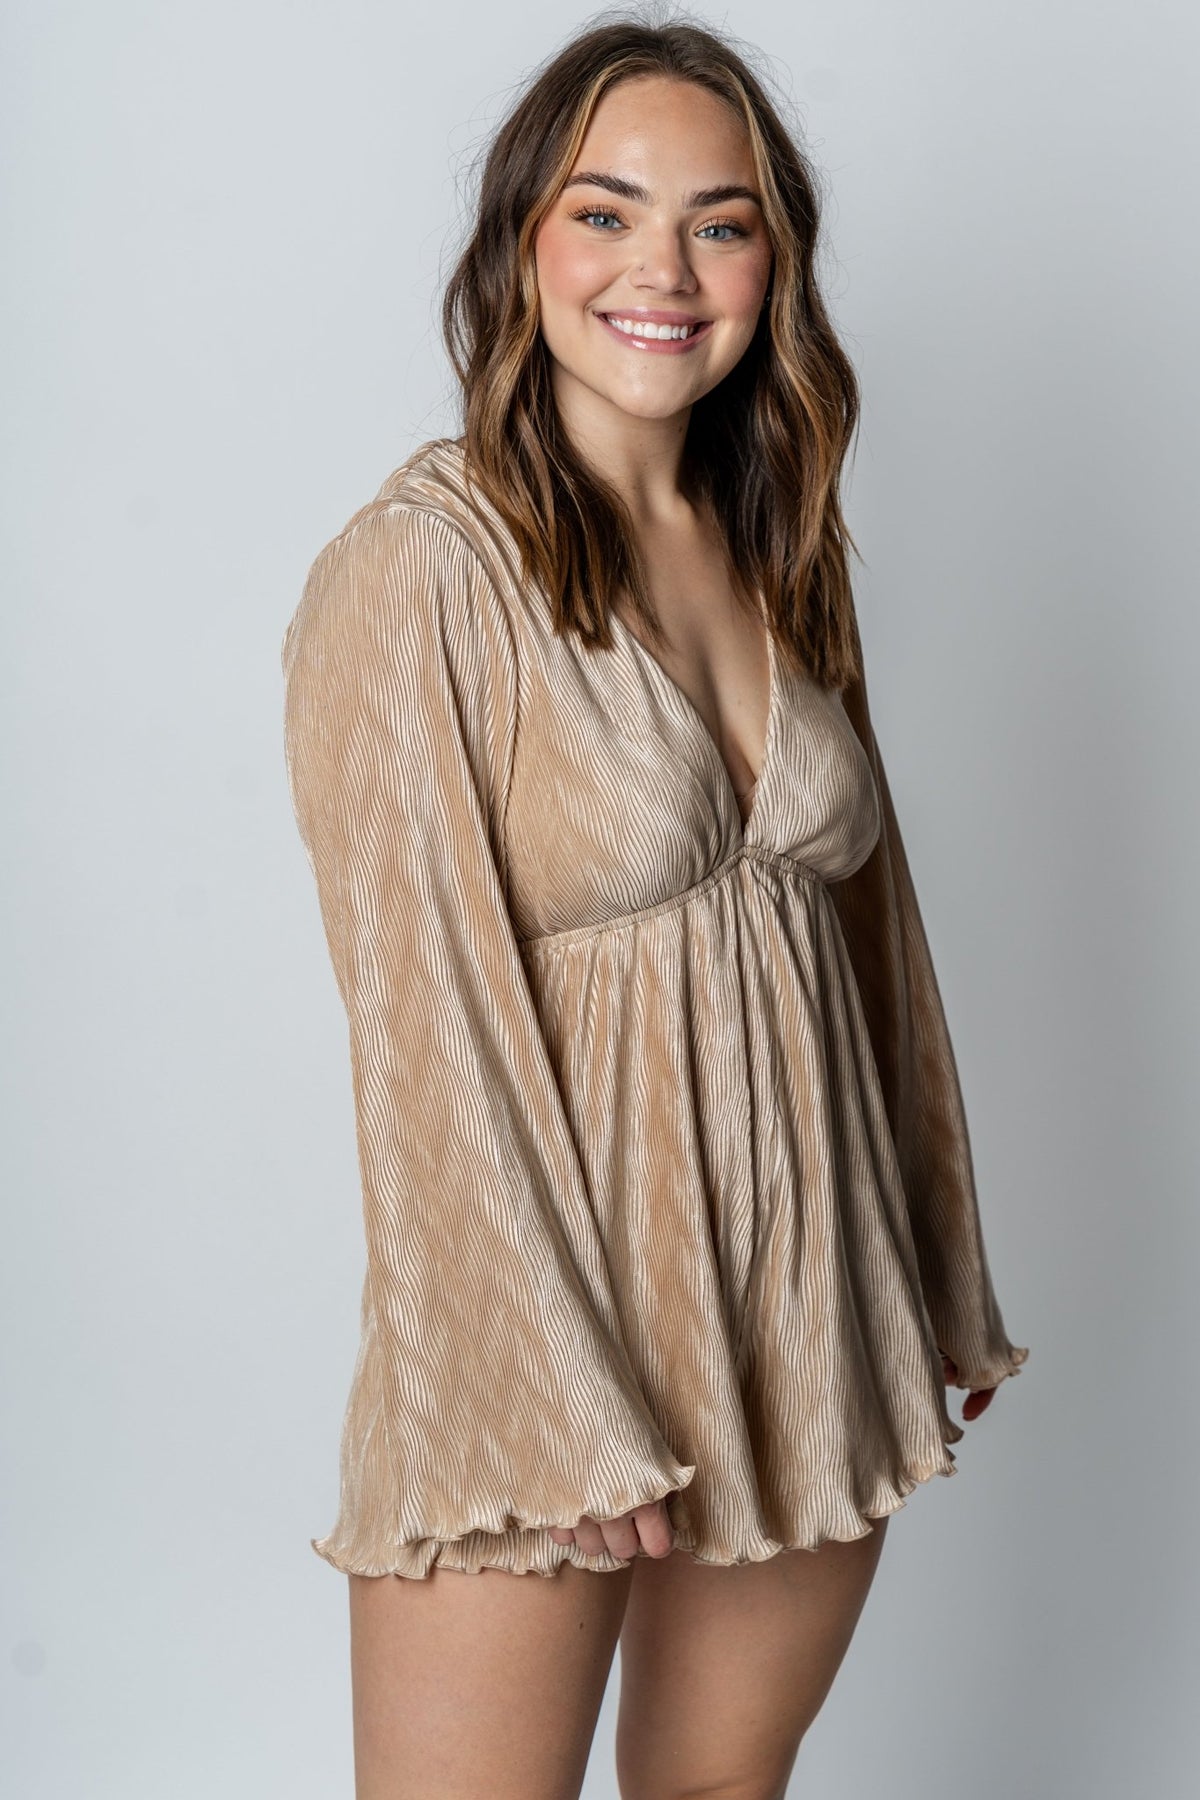 Bell sleeve pleated romper taupe - Cute Romper - Trendy Rompers and Pantsuits at Lush Fashion Lounge Boutique in Oklahoma City